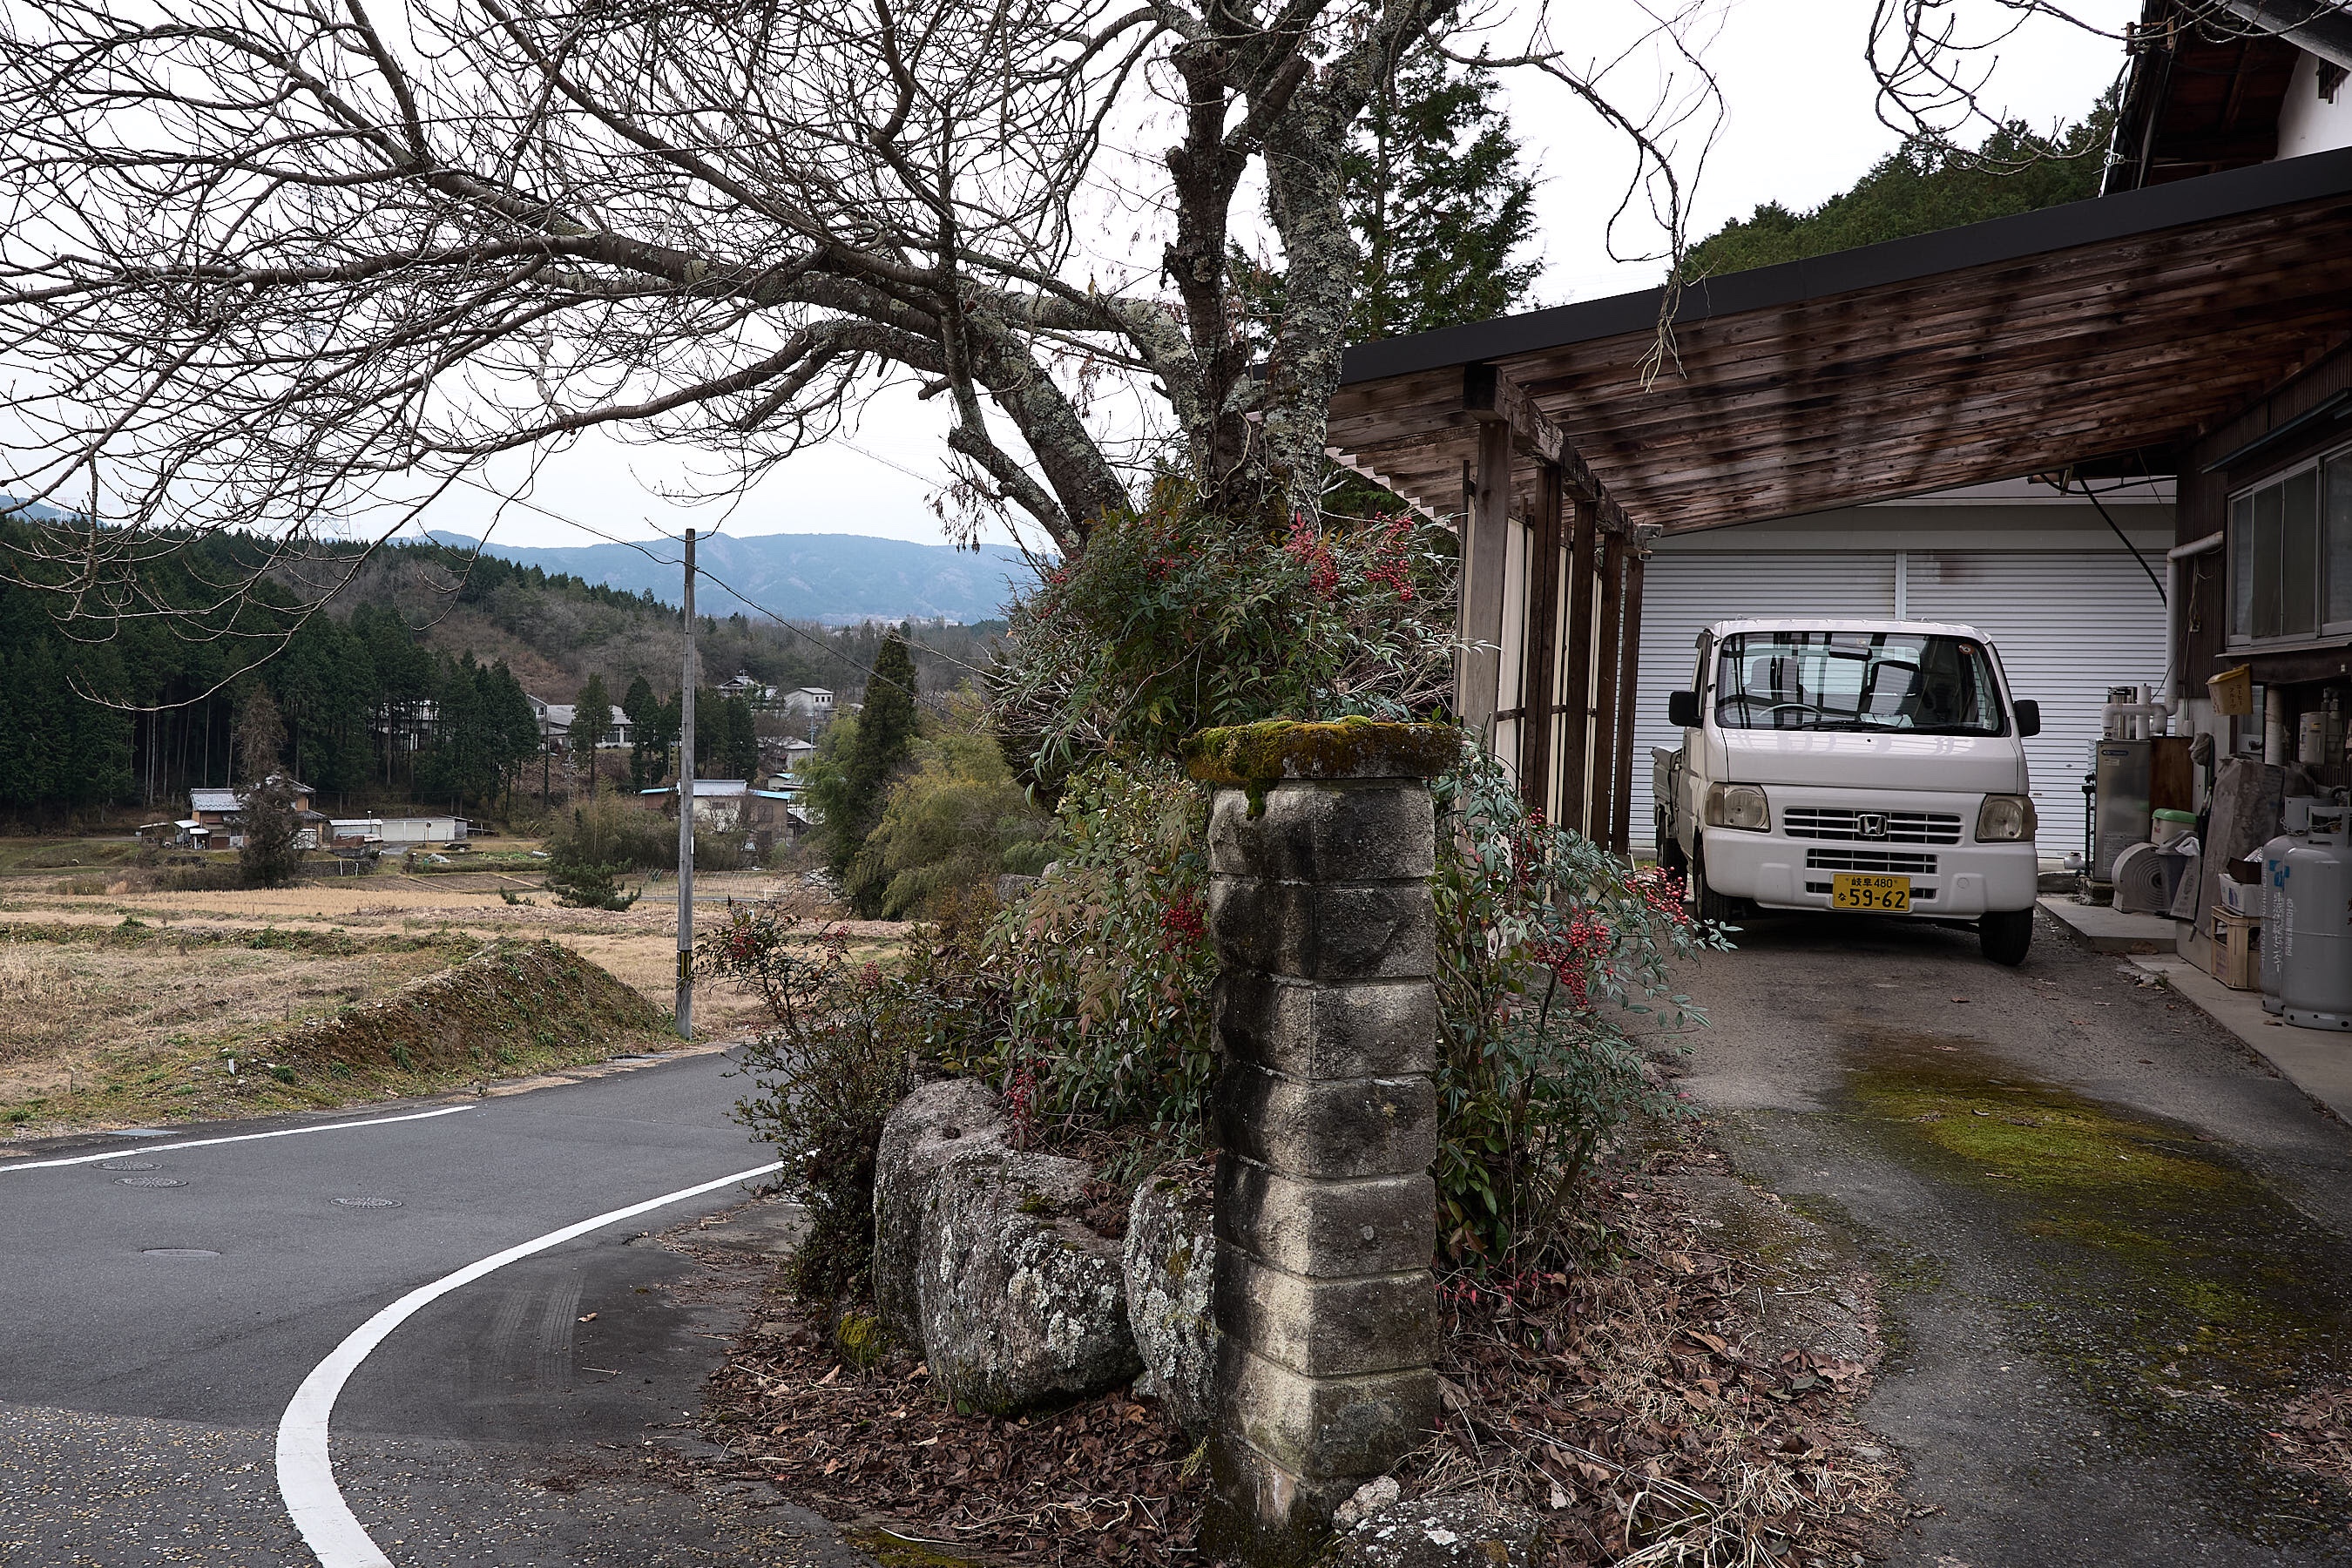 A keitora farmers truck parked along the Nakasendō. This is the point where I turned off the route to head for Takenami station.